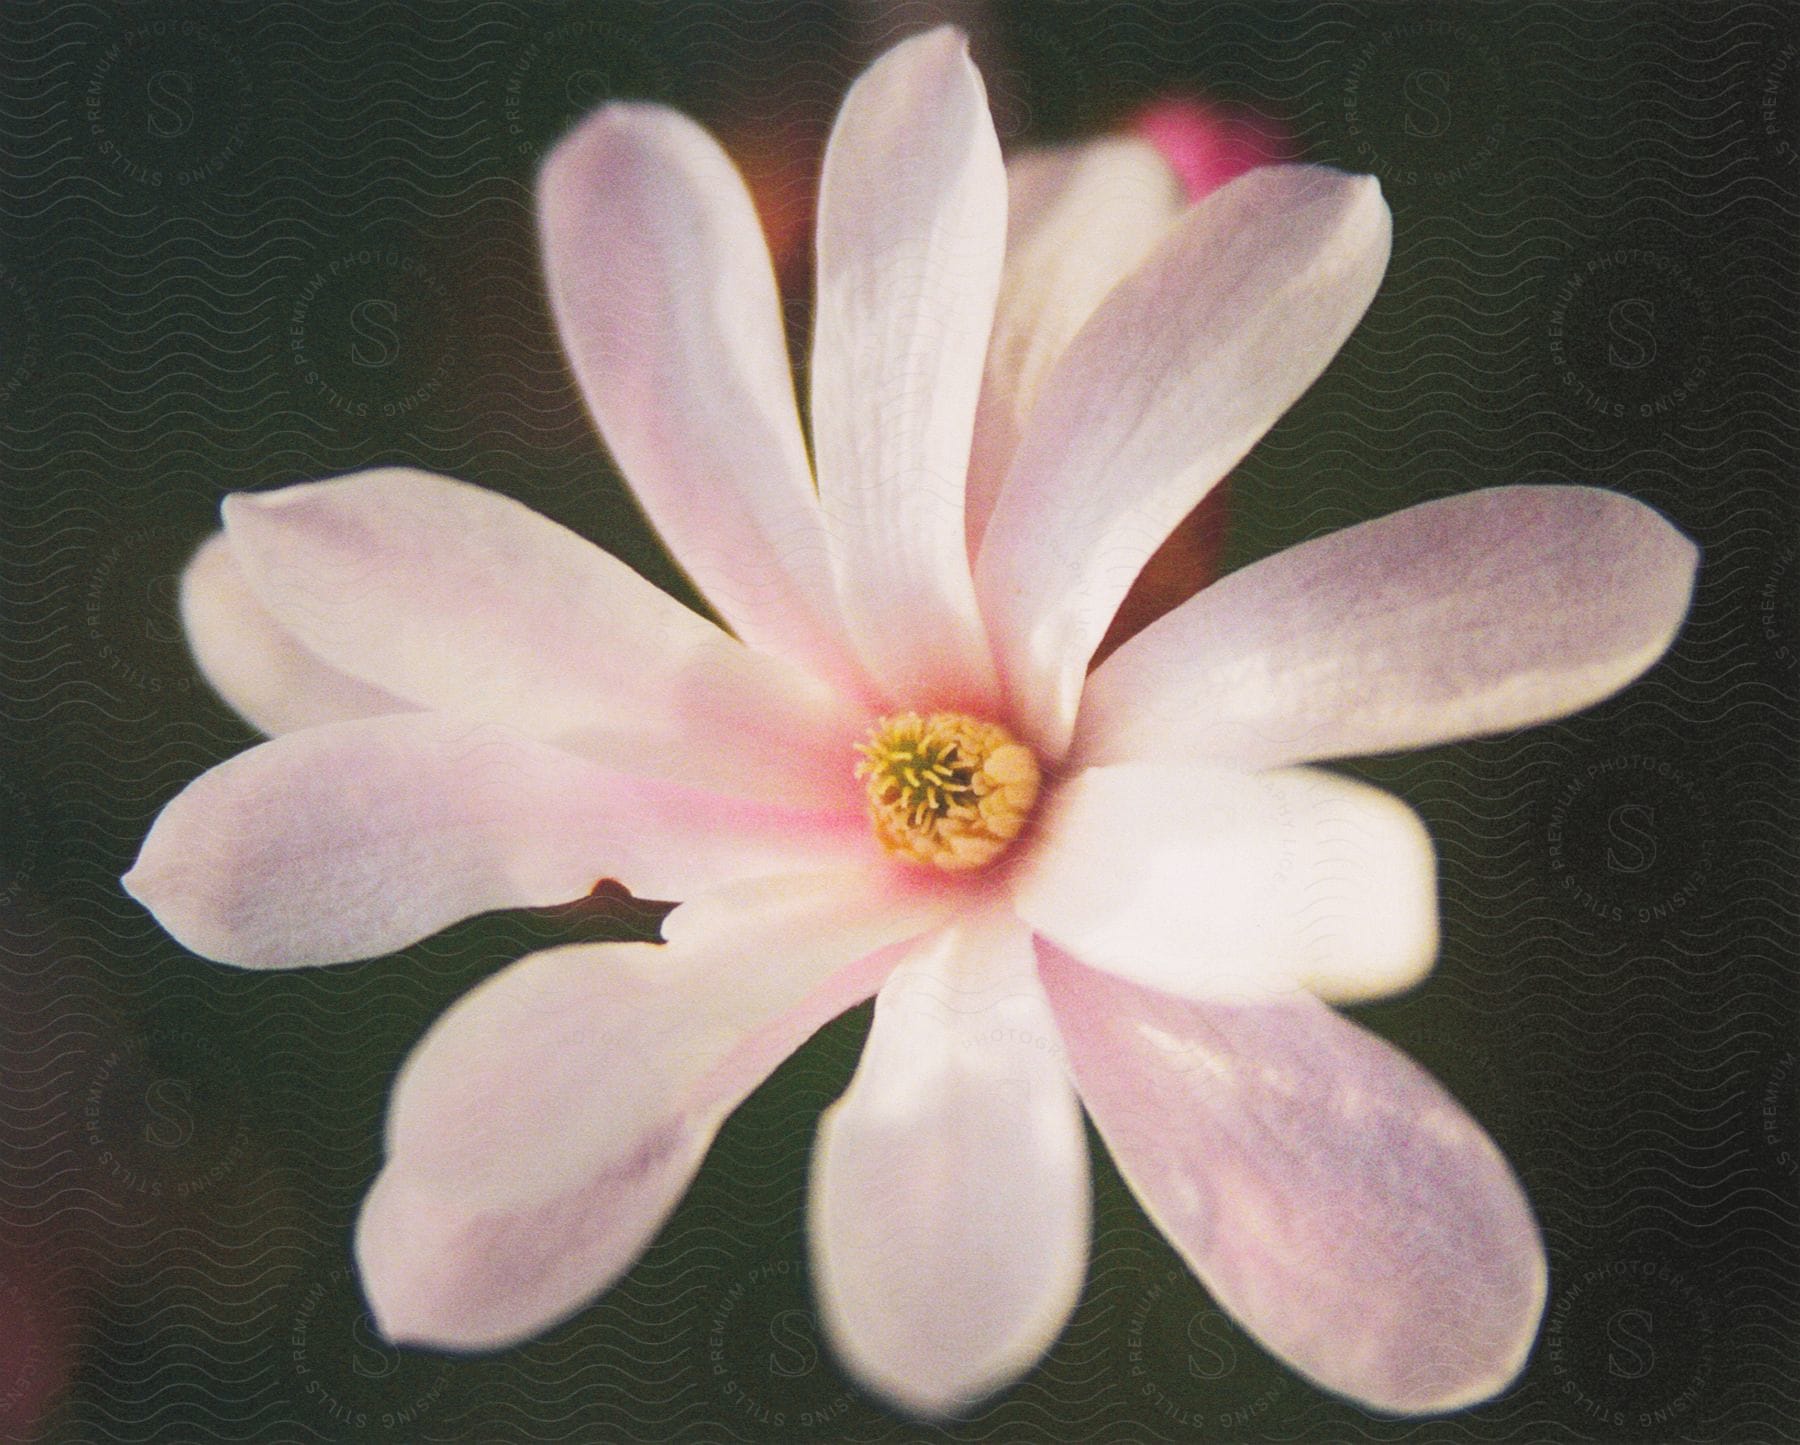 Close-up of a flower with light pink petals.